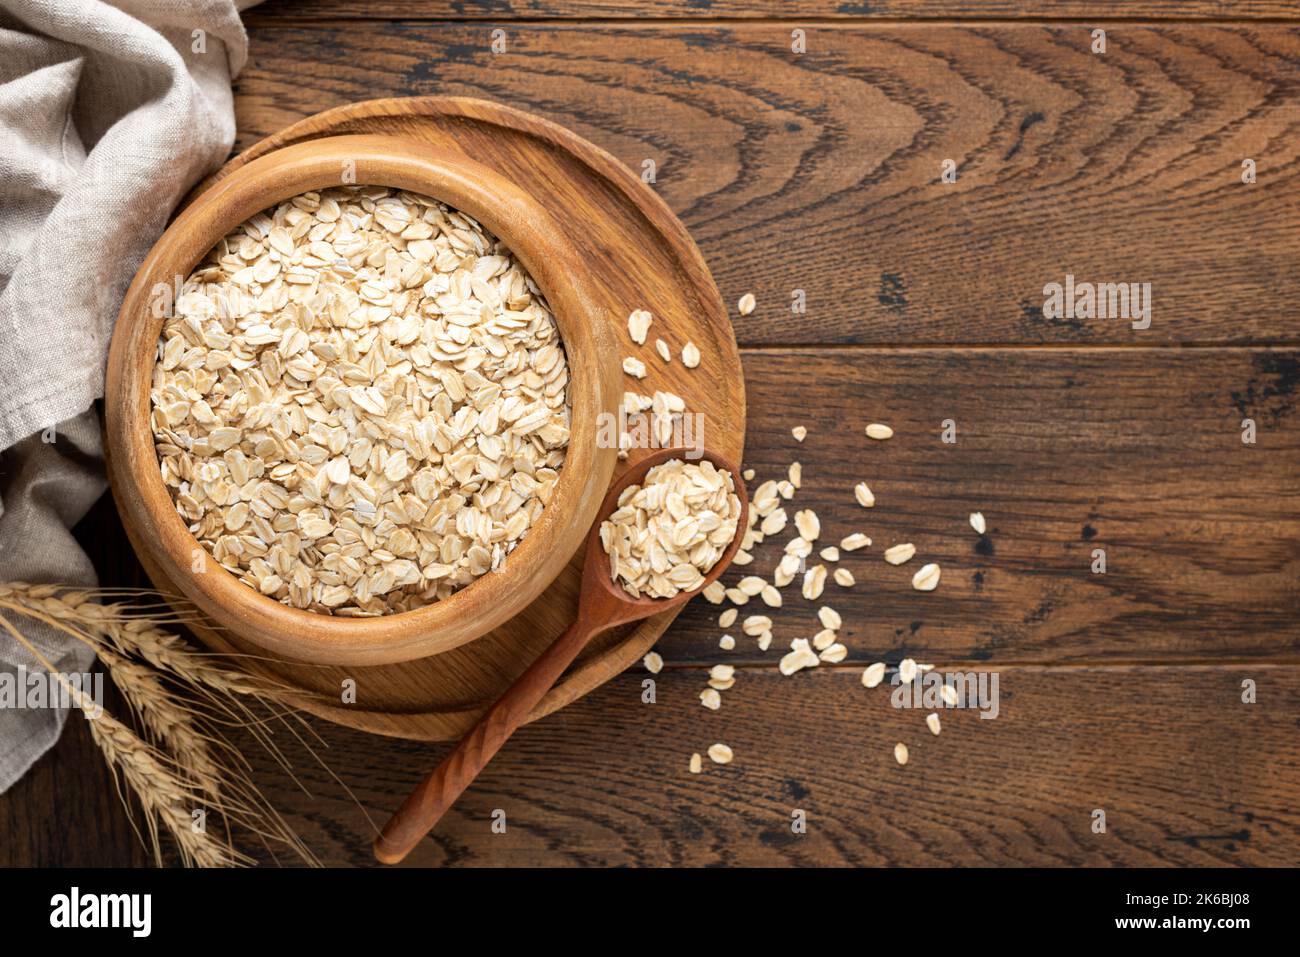 Rolled oats or oat flakes in wooden bowl on old wooden table background. Top view, copy space for text or design elements. Agriculture, healthy eating Stock Photo